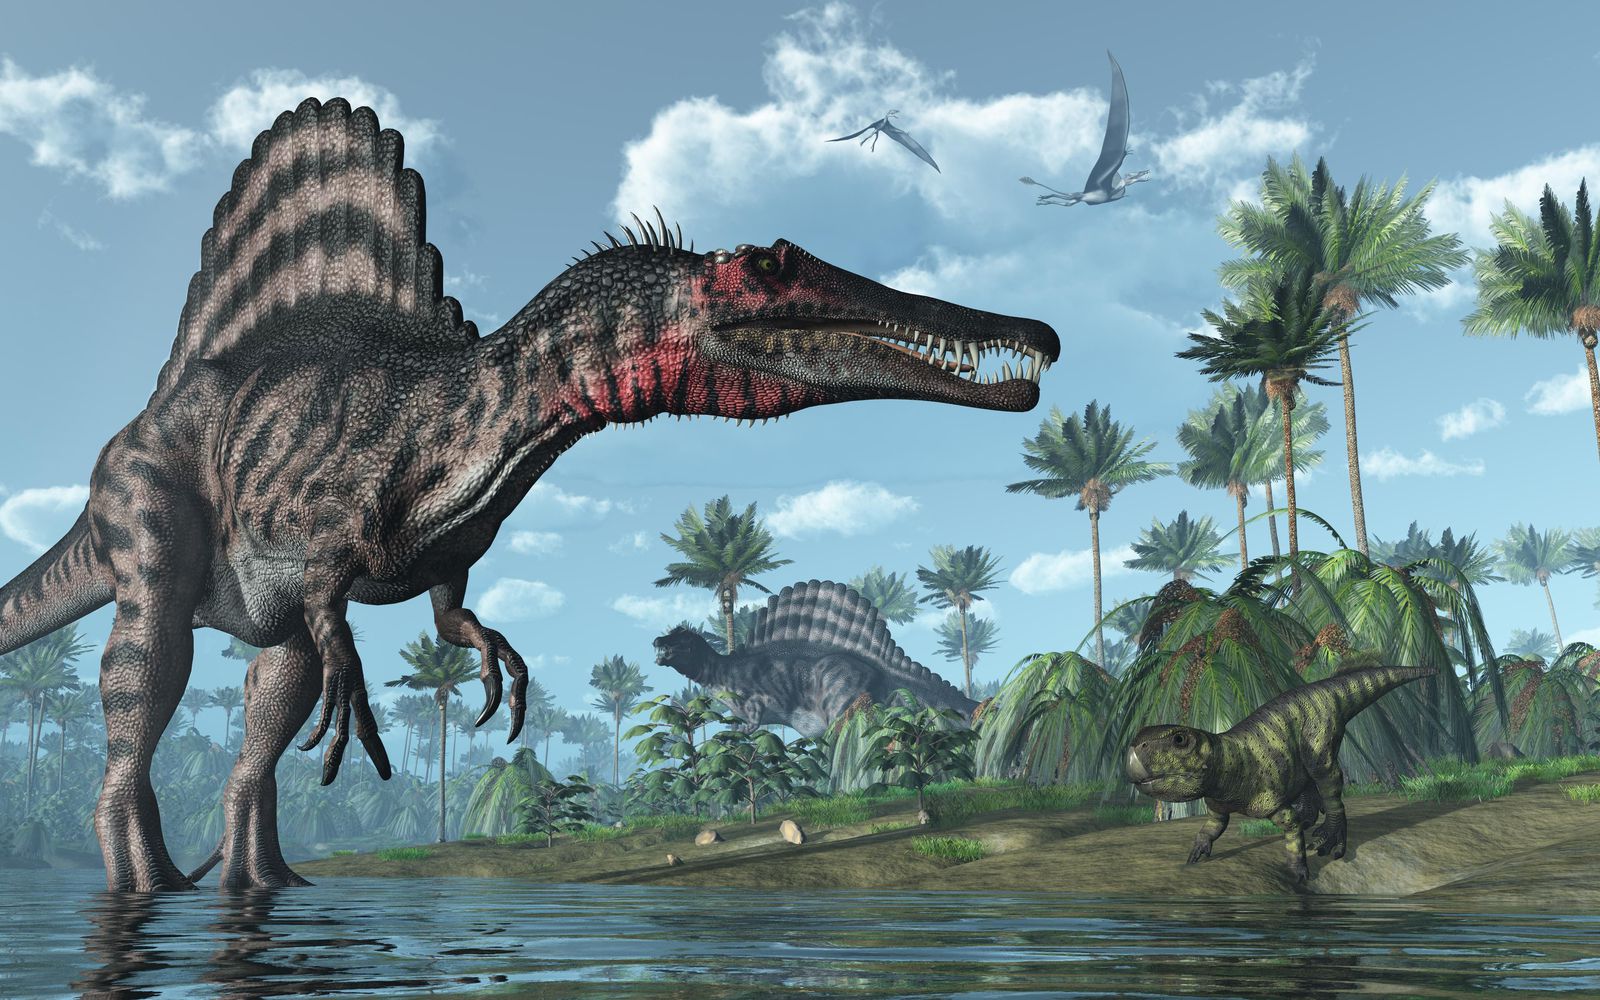 This Random Knowledge Quiz Keeps Getting Harder. Can You Get 10? Spinosaurus